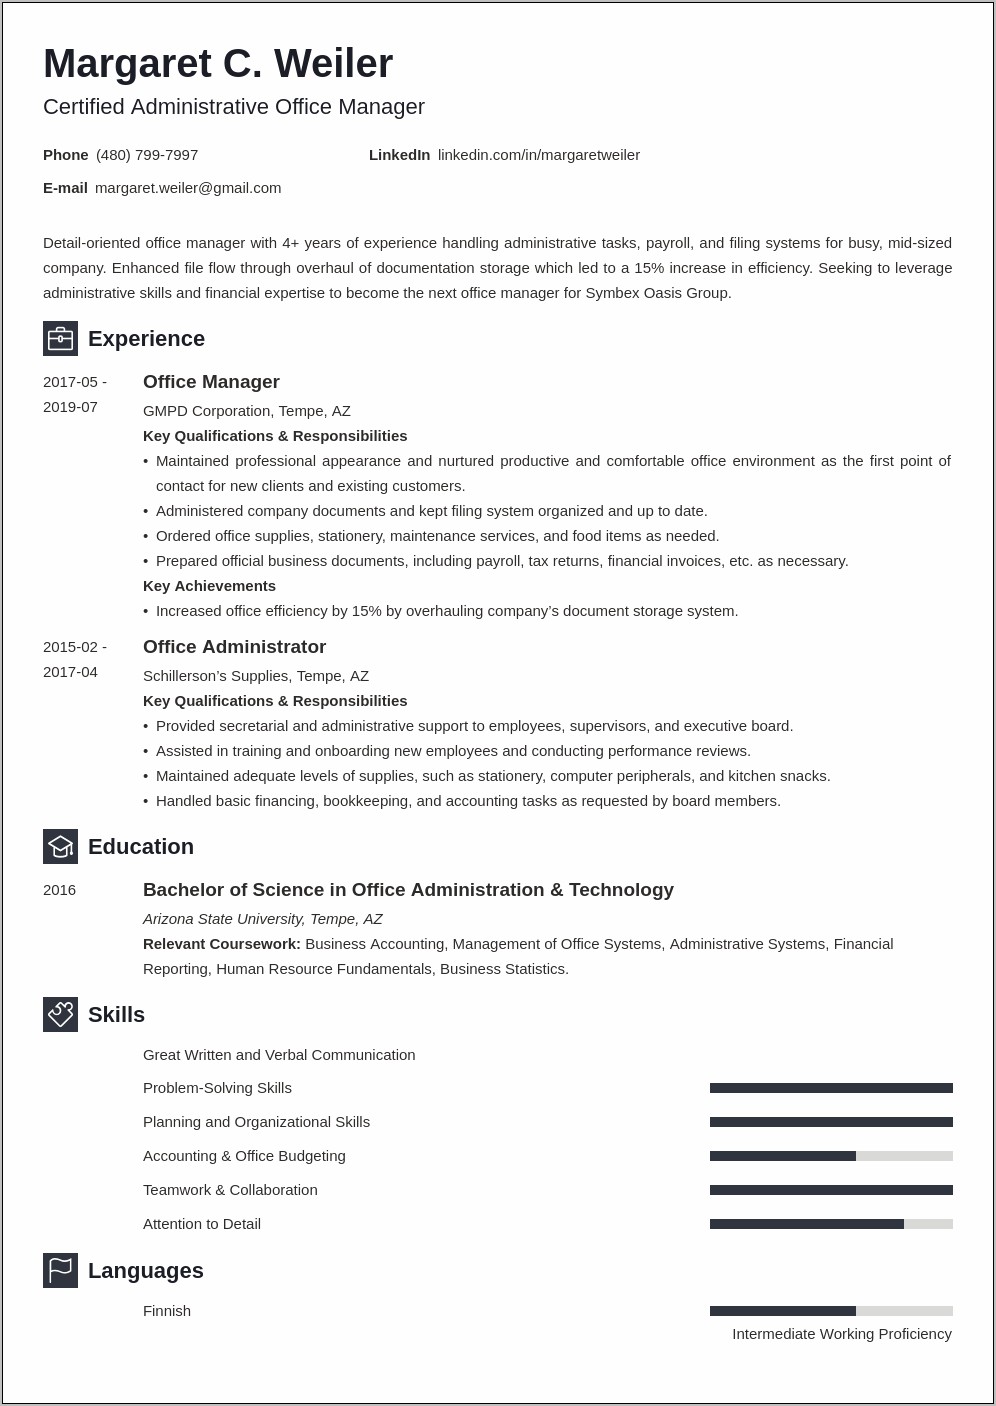 Resume For Office Manager Objective